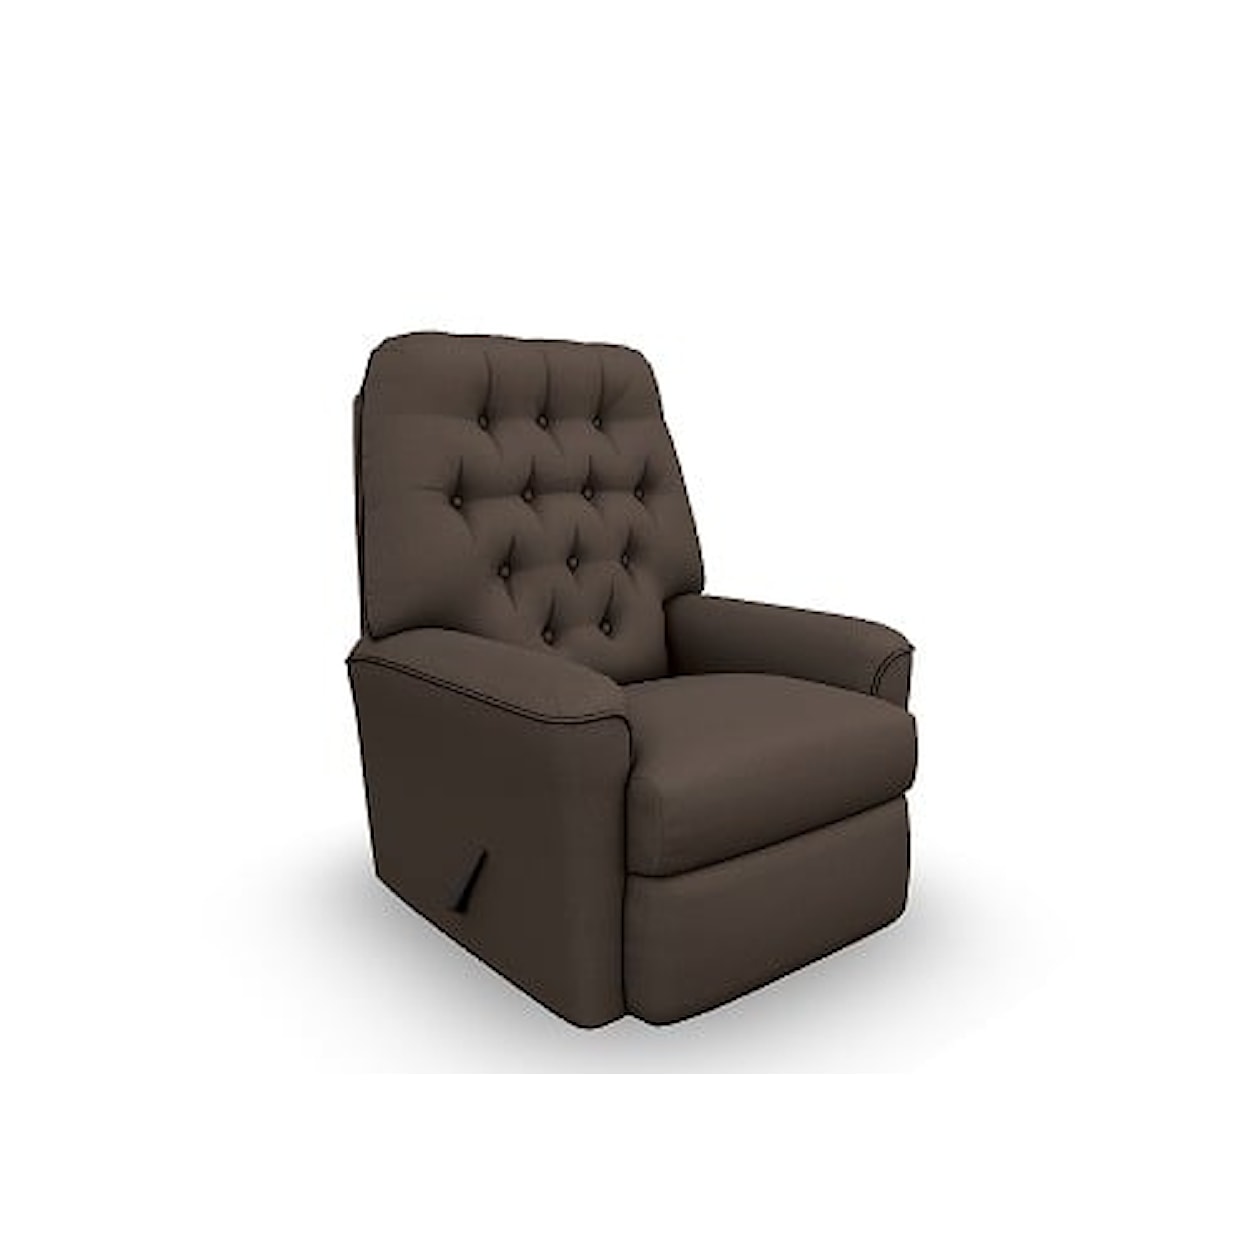 Best Home Furnishings Mexi Mexi Power Lift Recliner